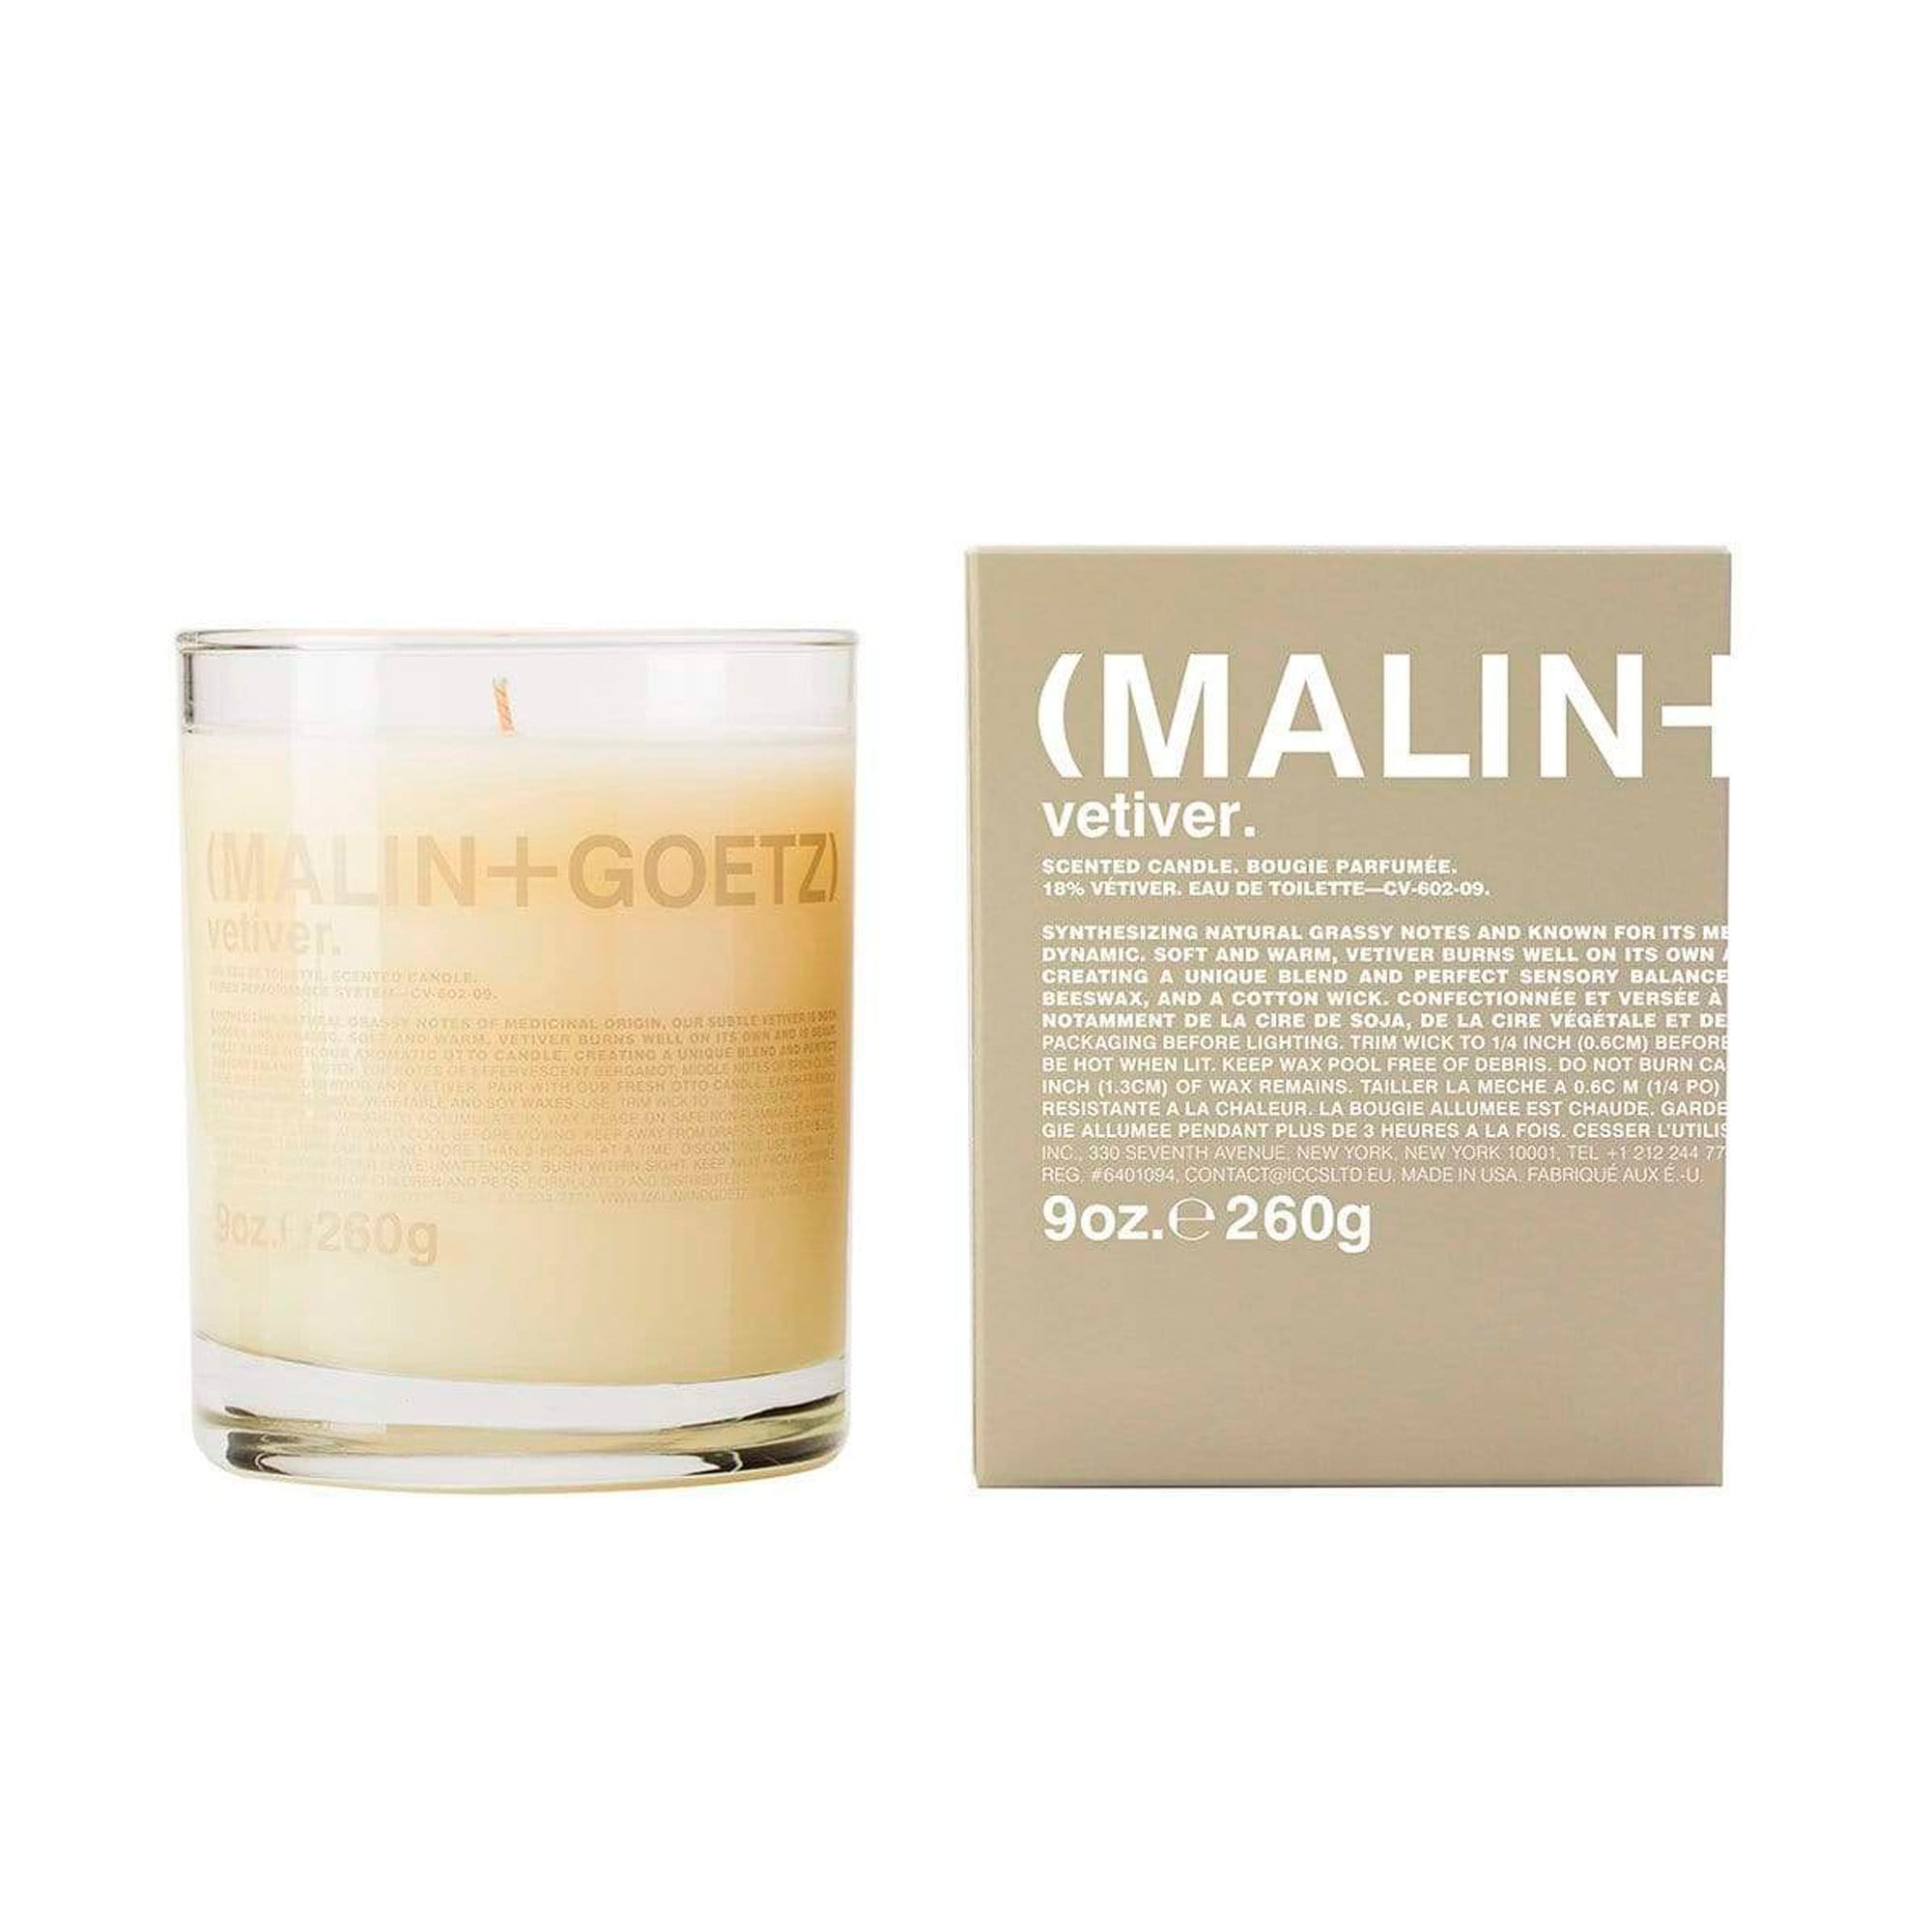 Vetiver Candle (MALIN+GOETZ) Scented Candle